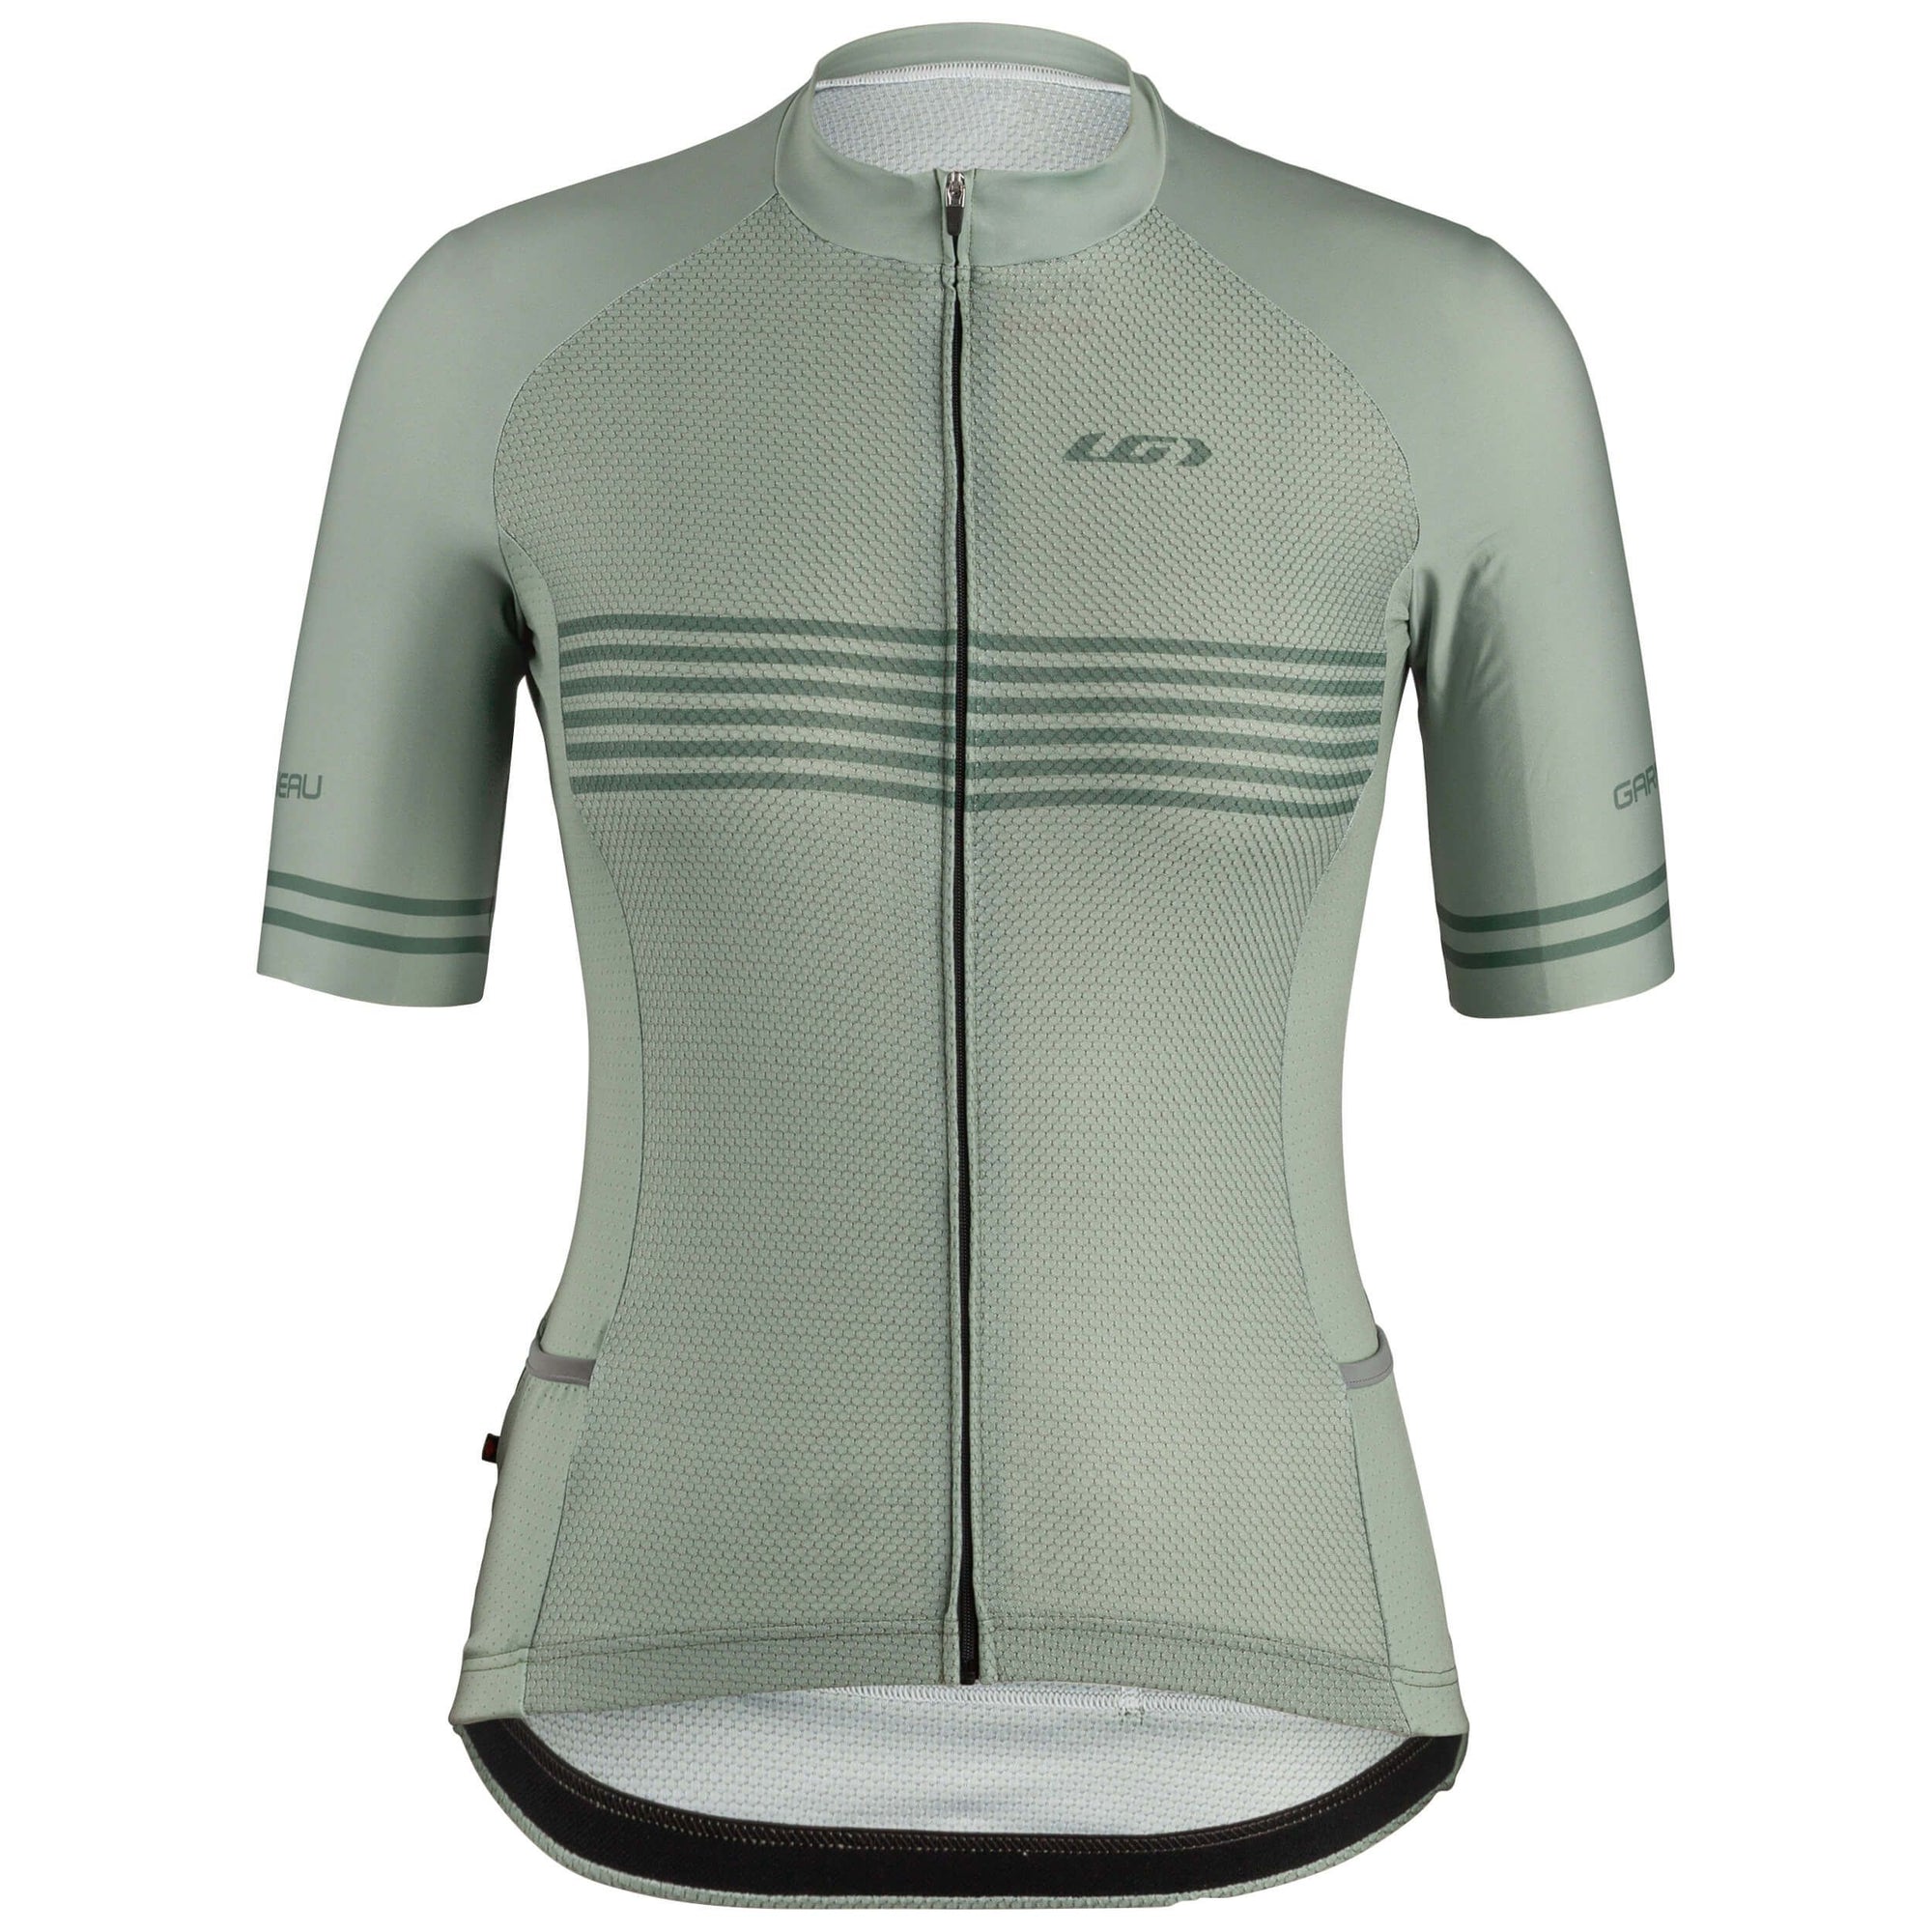 W'S Course Air Jersey - Grey Linght, S